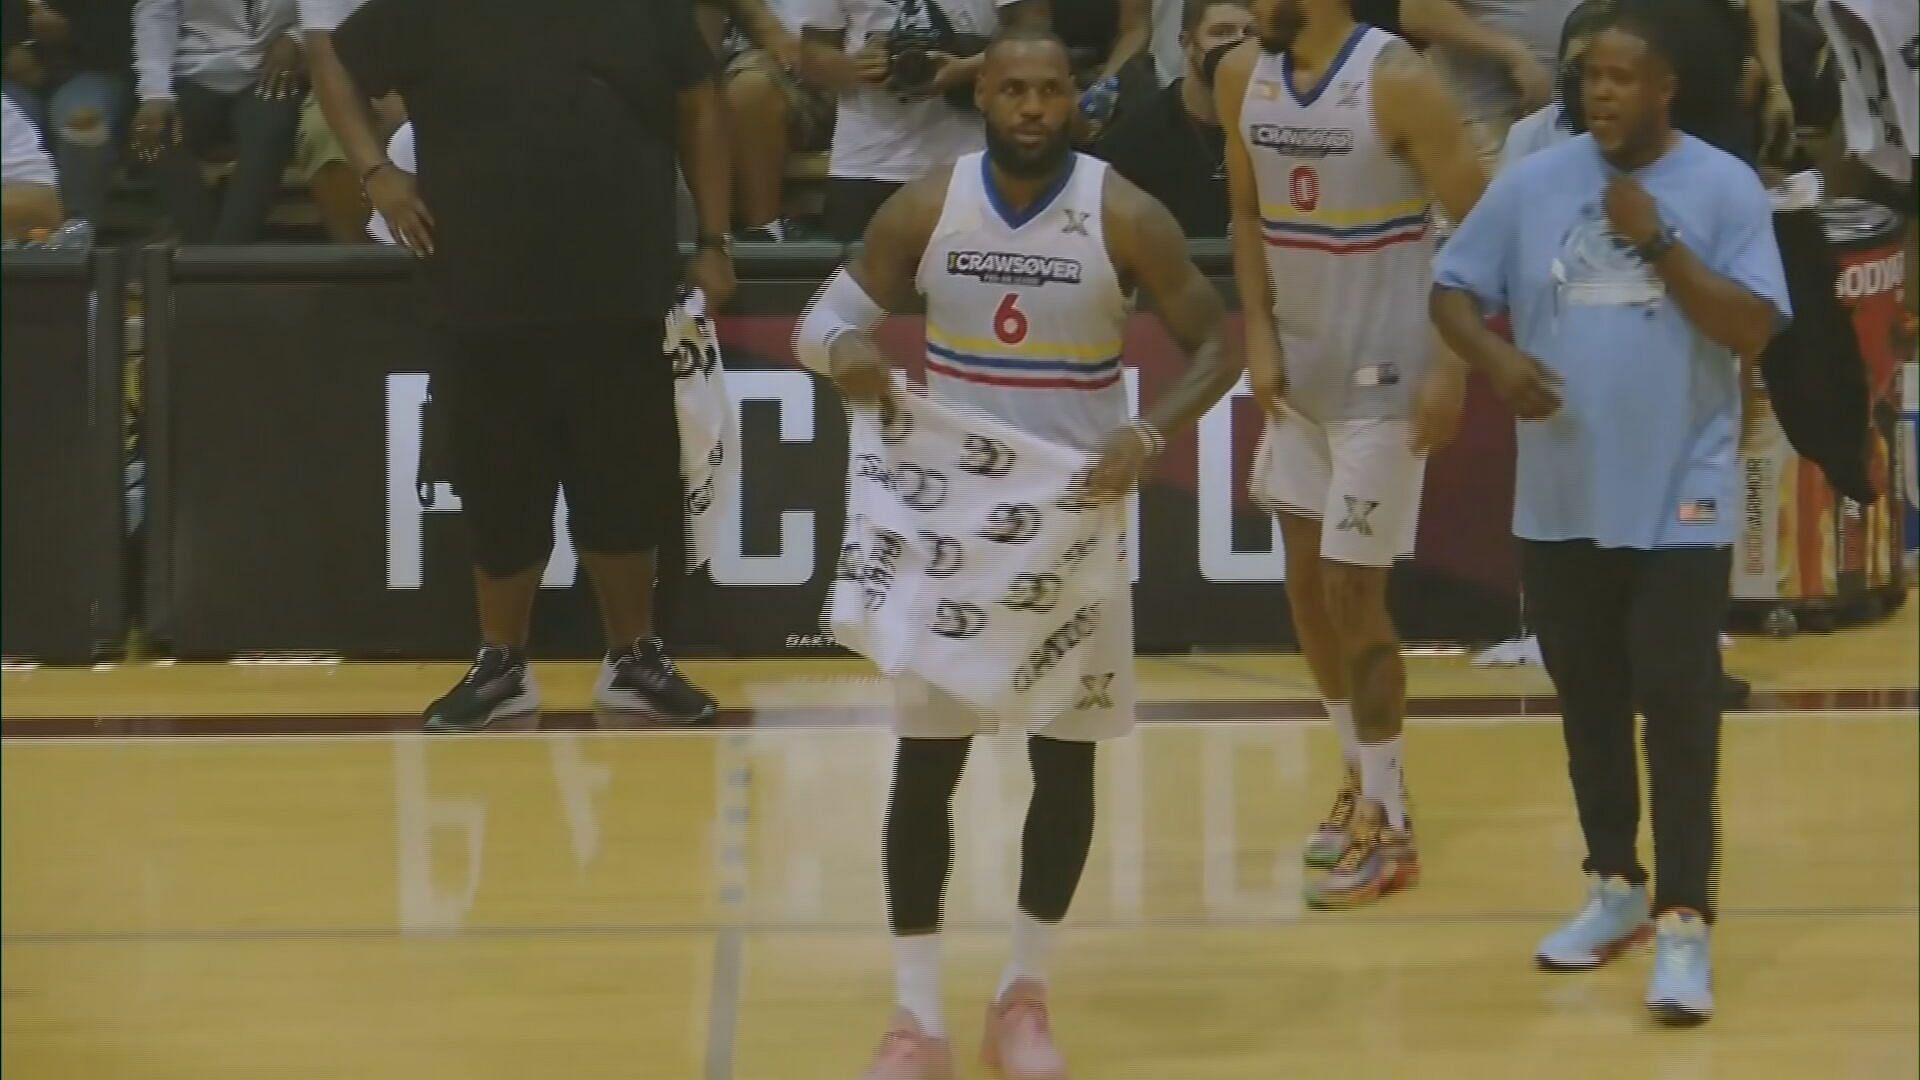 LeBron James suiting up for the Pro-Am game